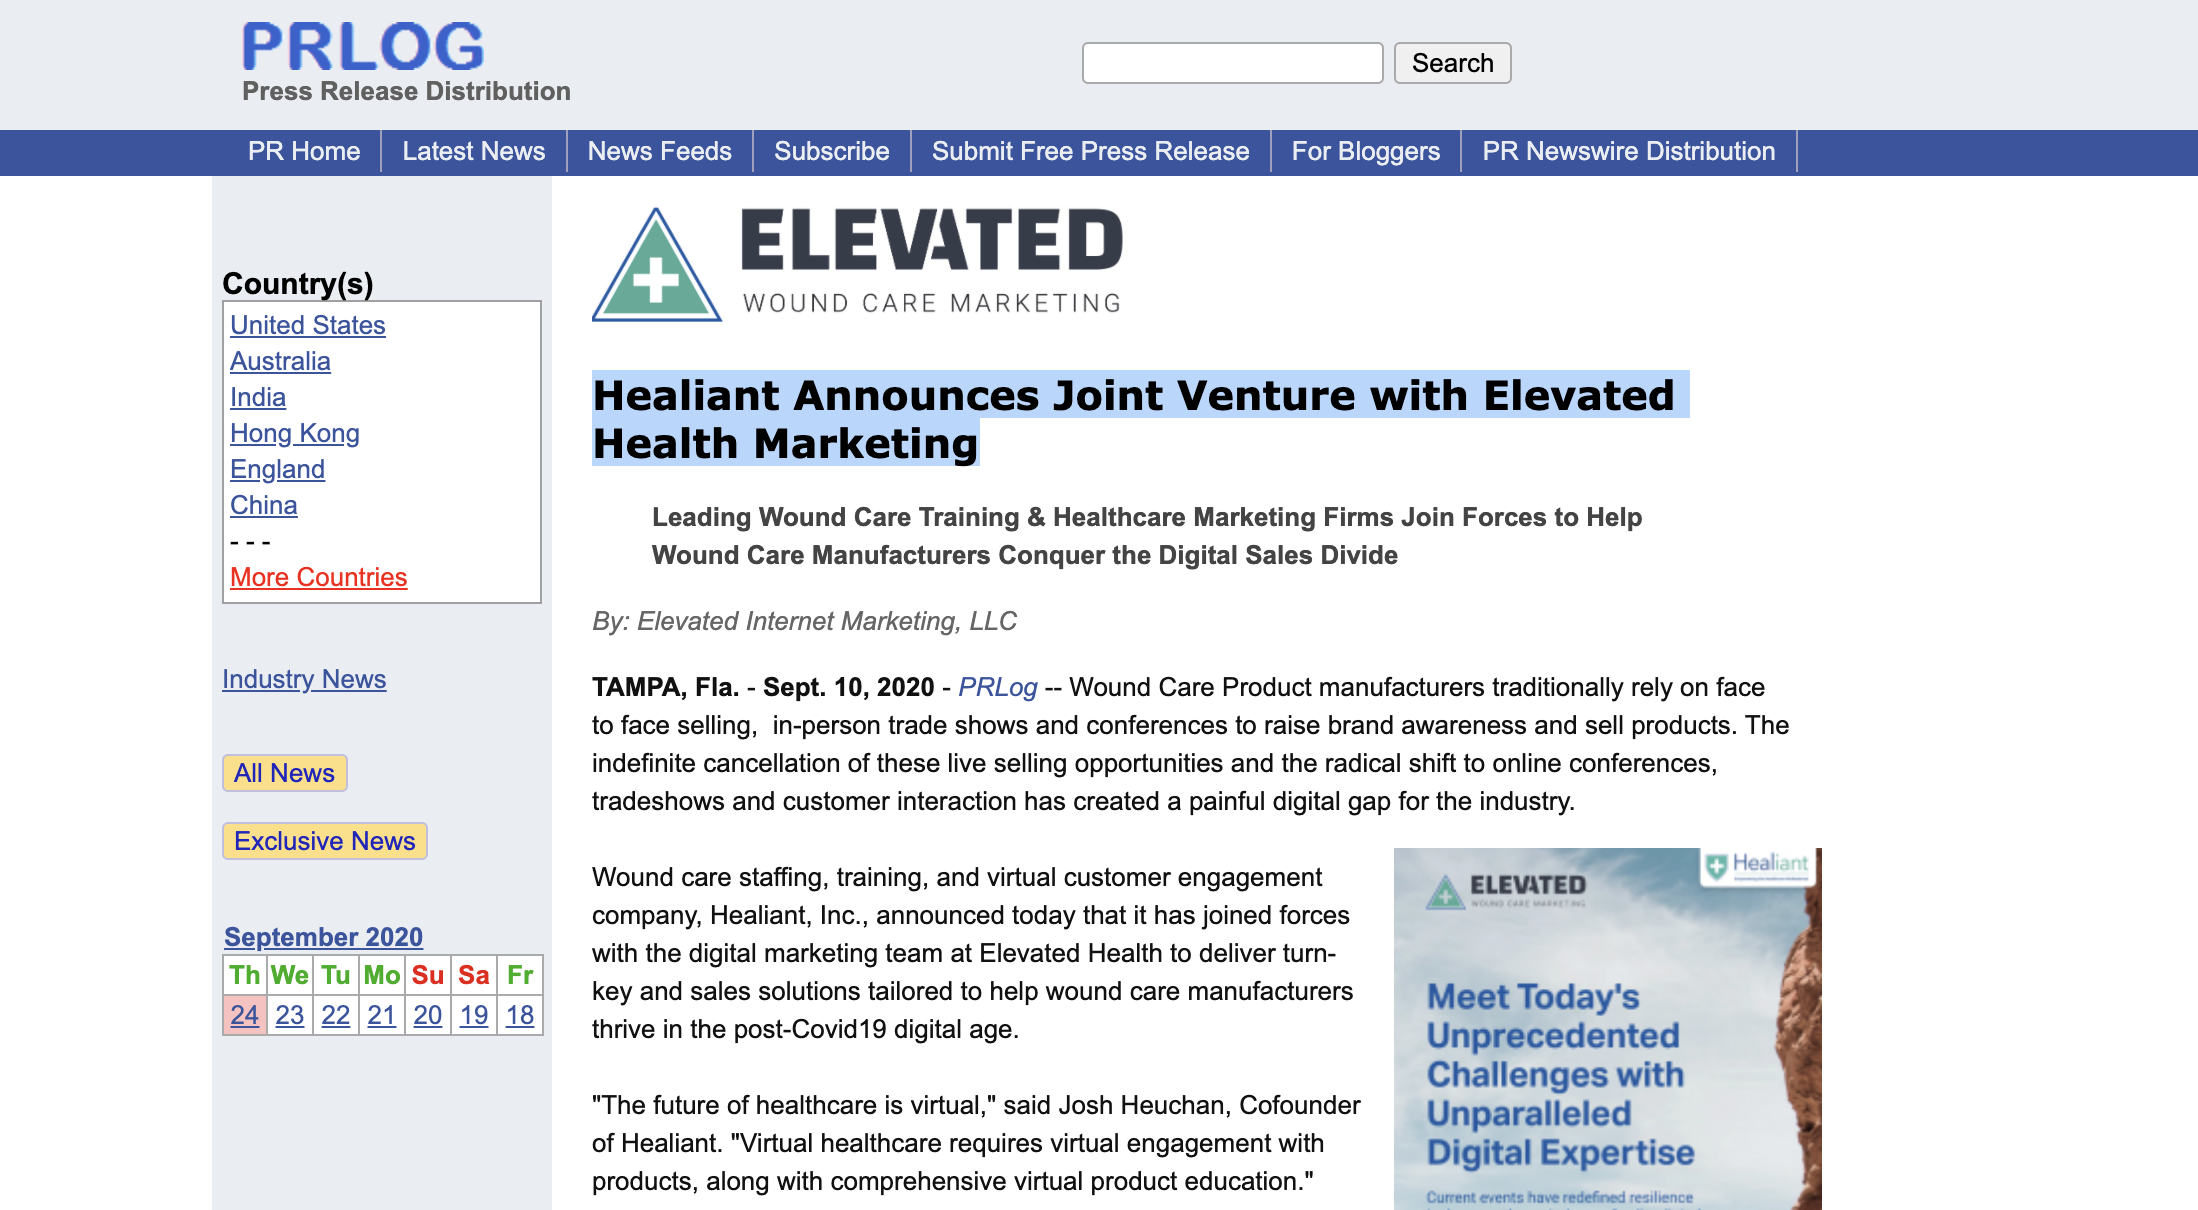 Healiant Announces Joint Venture with Elevated Health Marketing